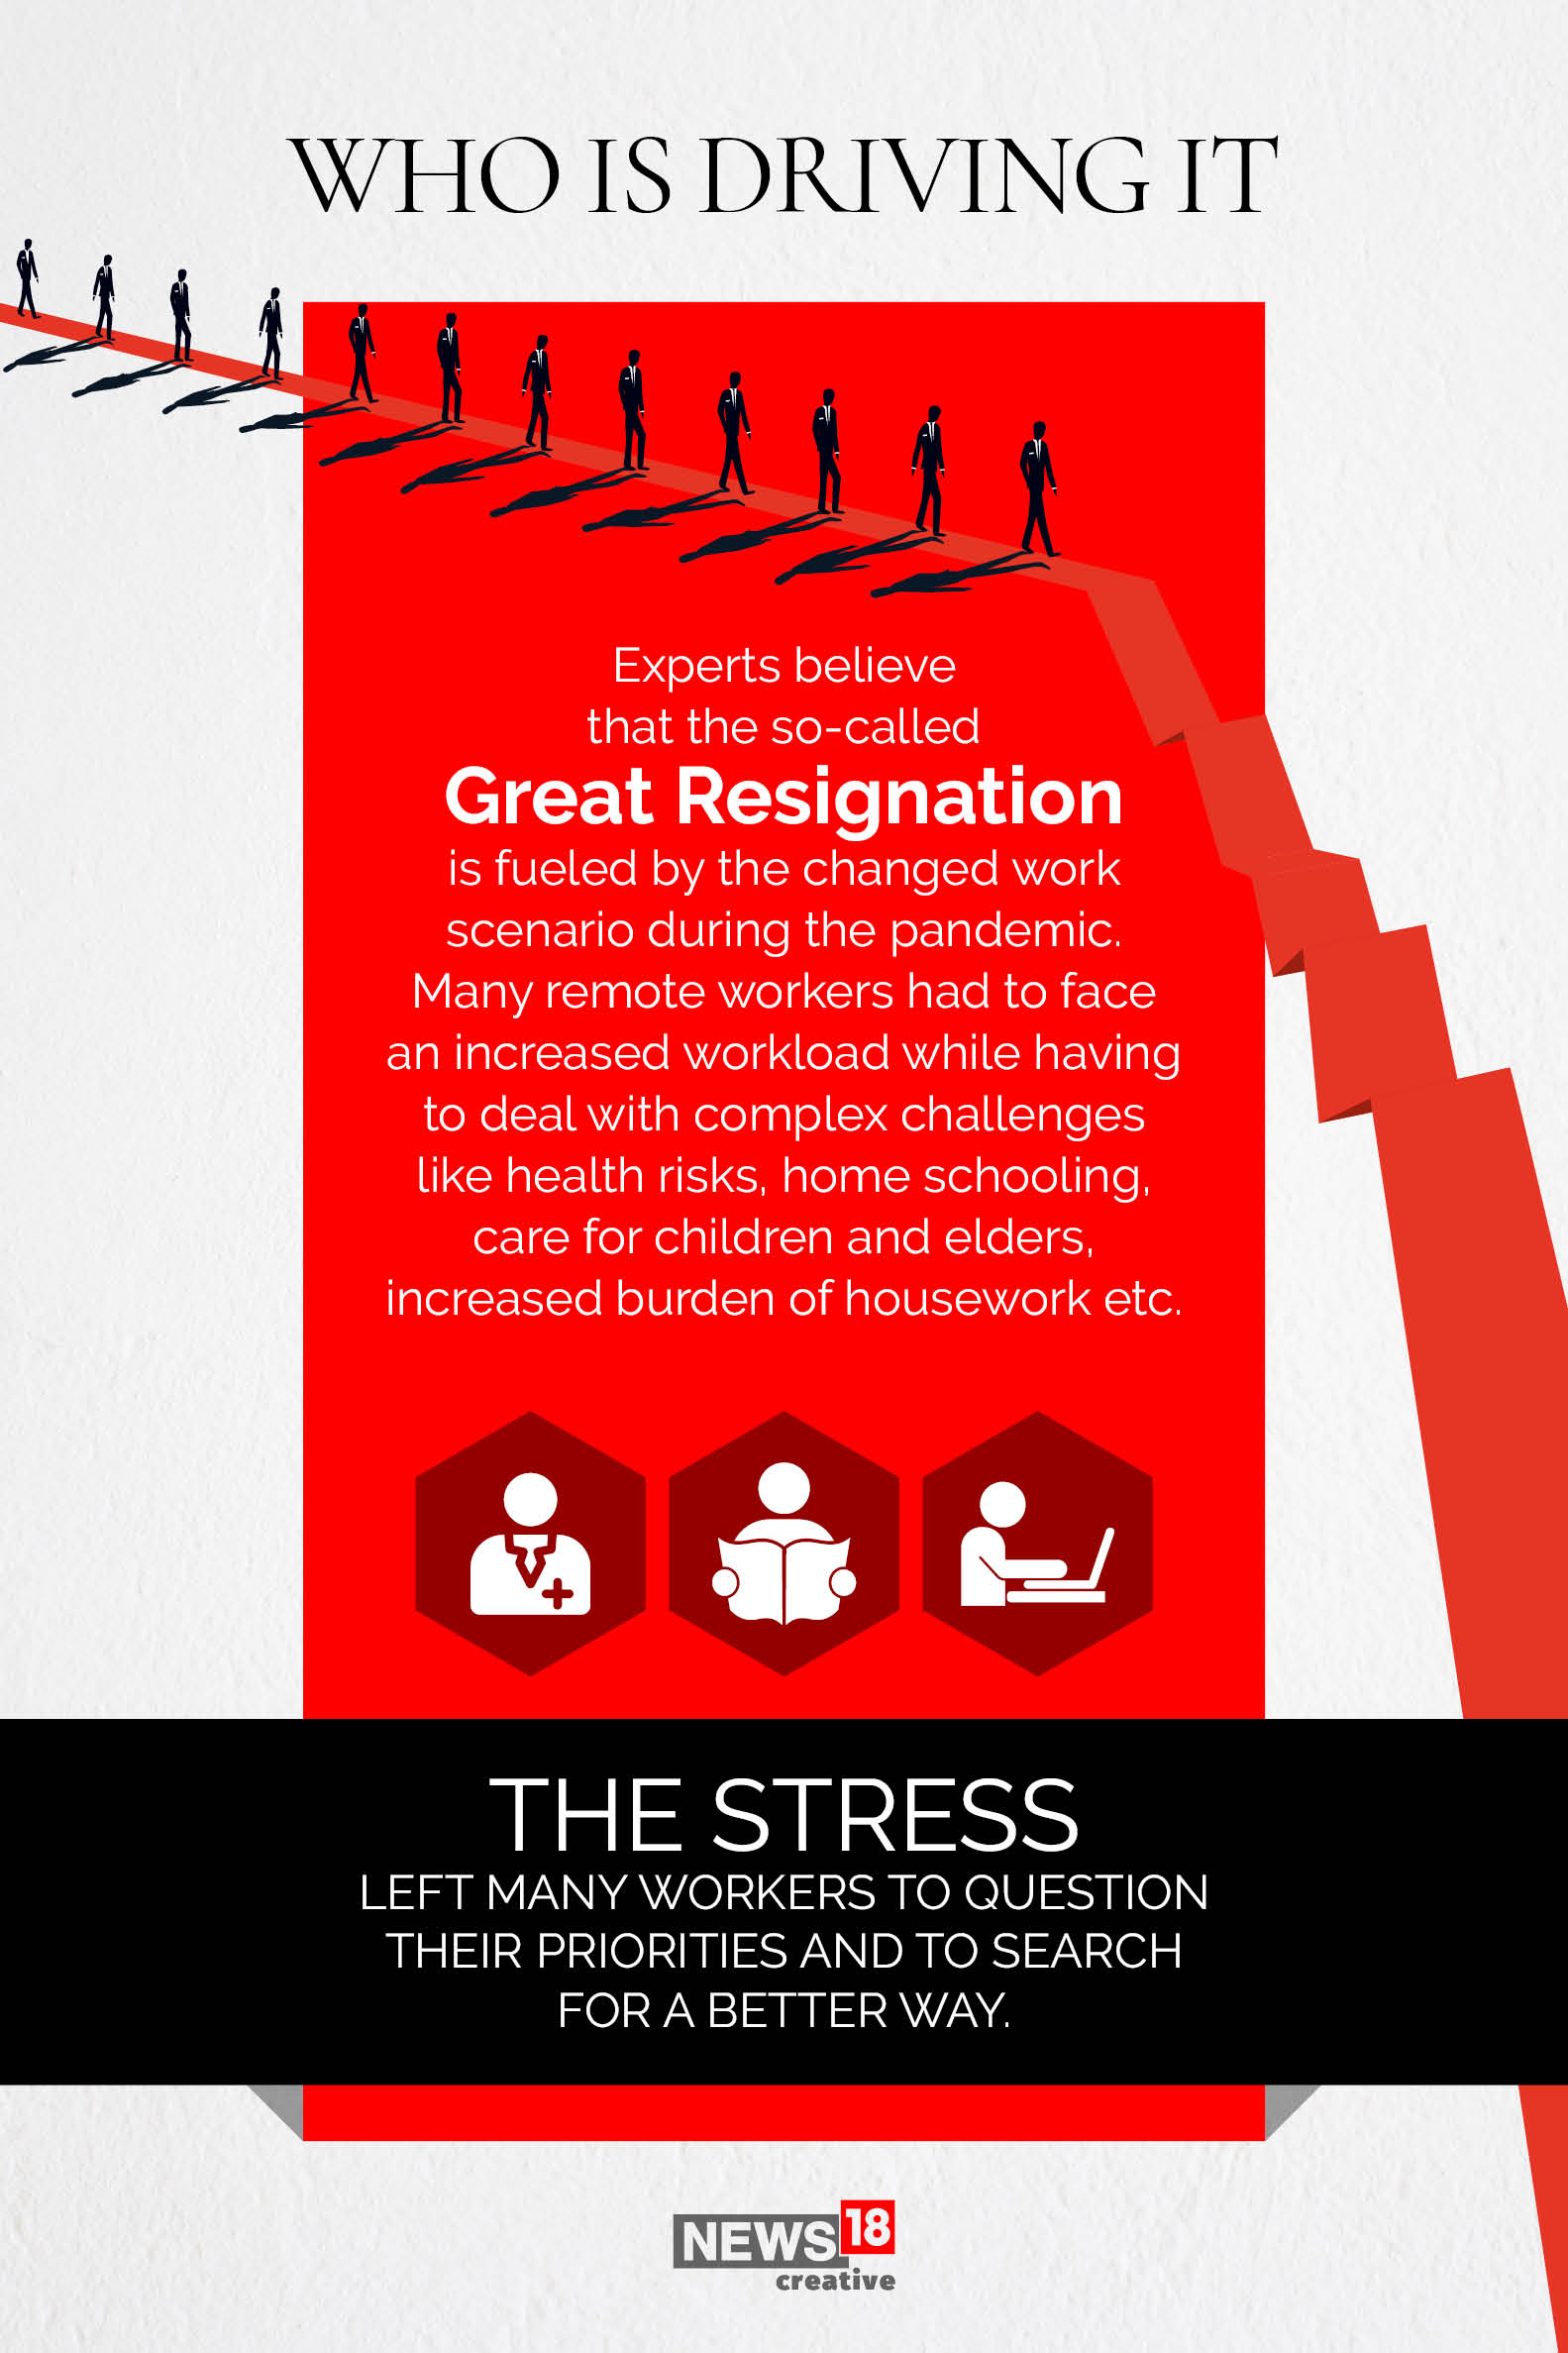 Forbes India - Jobs: What Is Fuelling The Great Resignation In America?